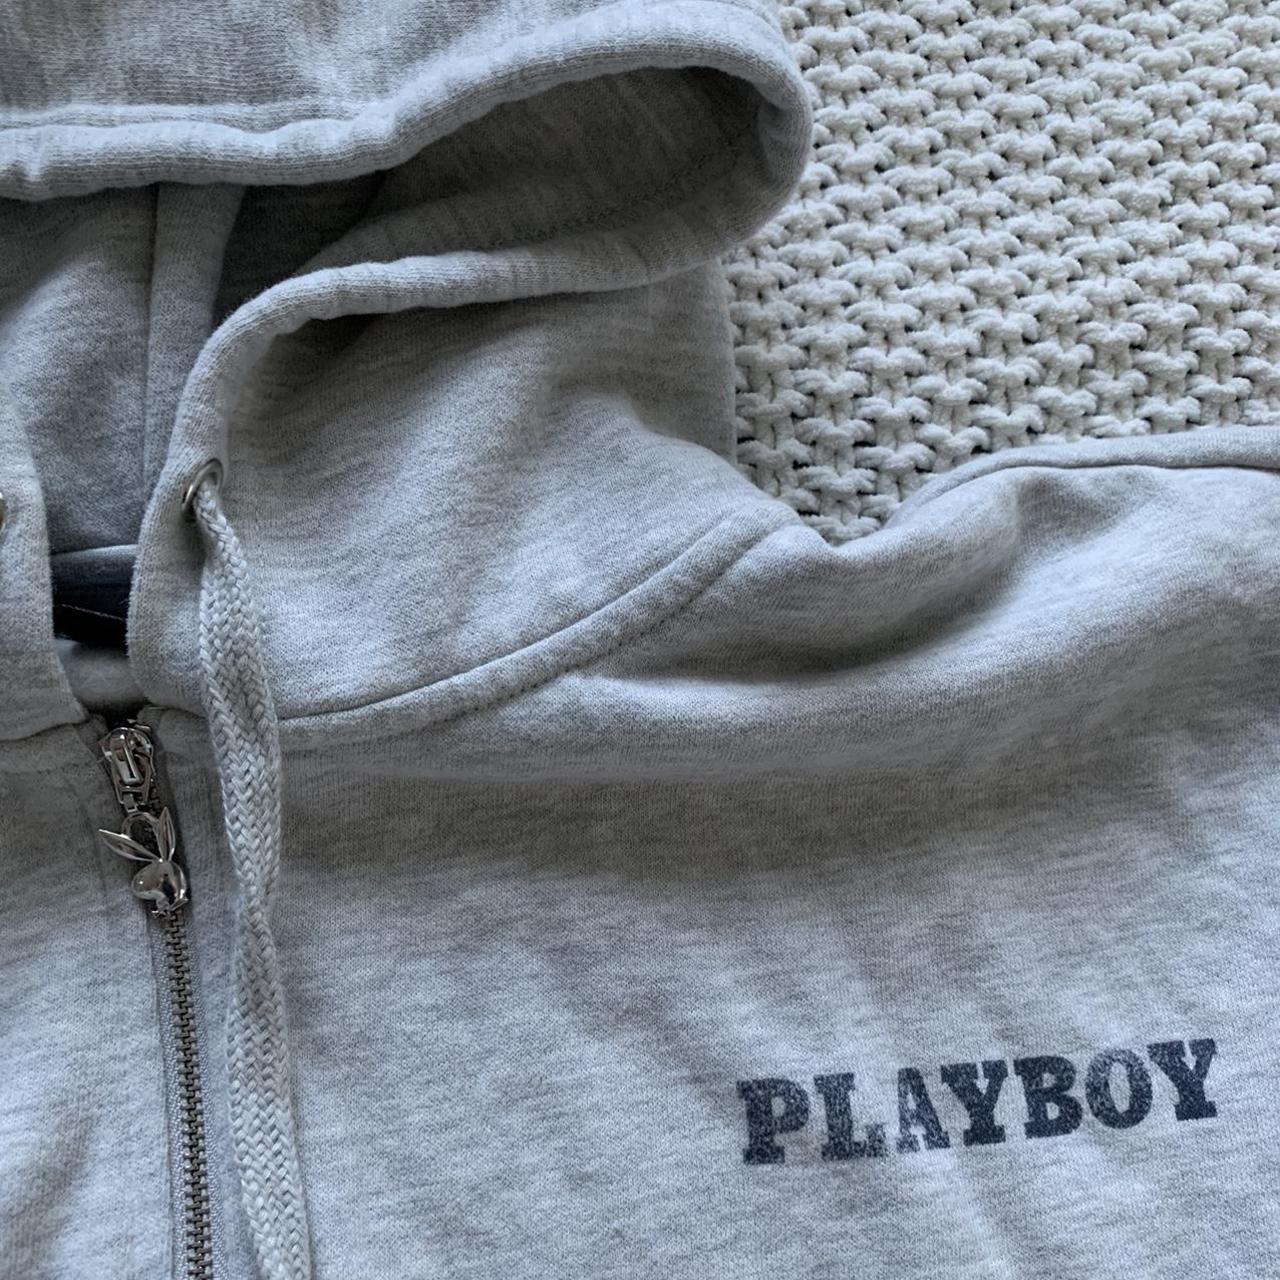 Playboy zip up sweater 🐰💗 -never worn, only tried... - Depop